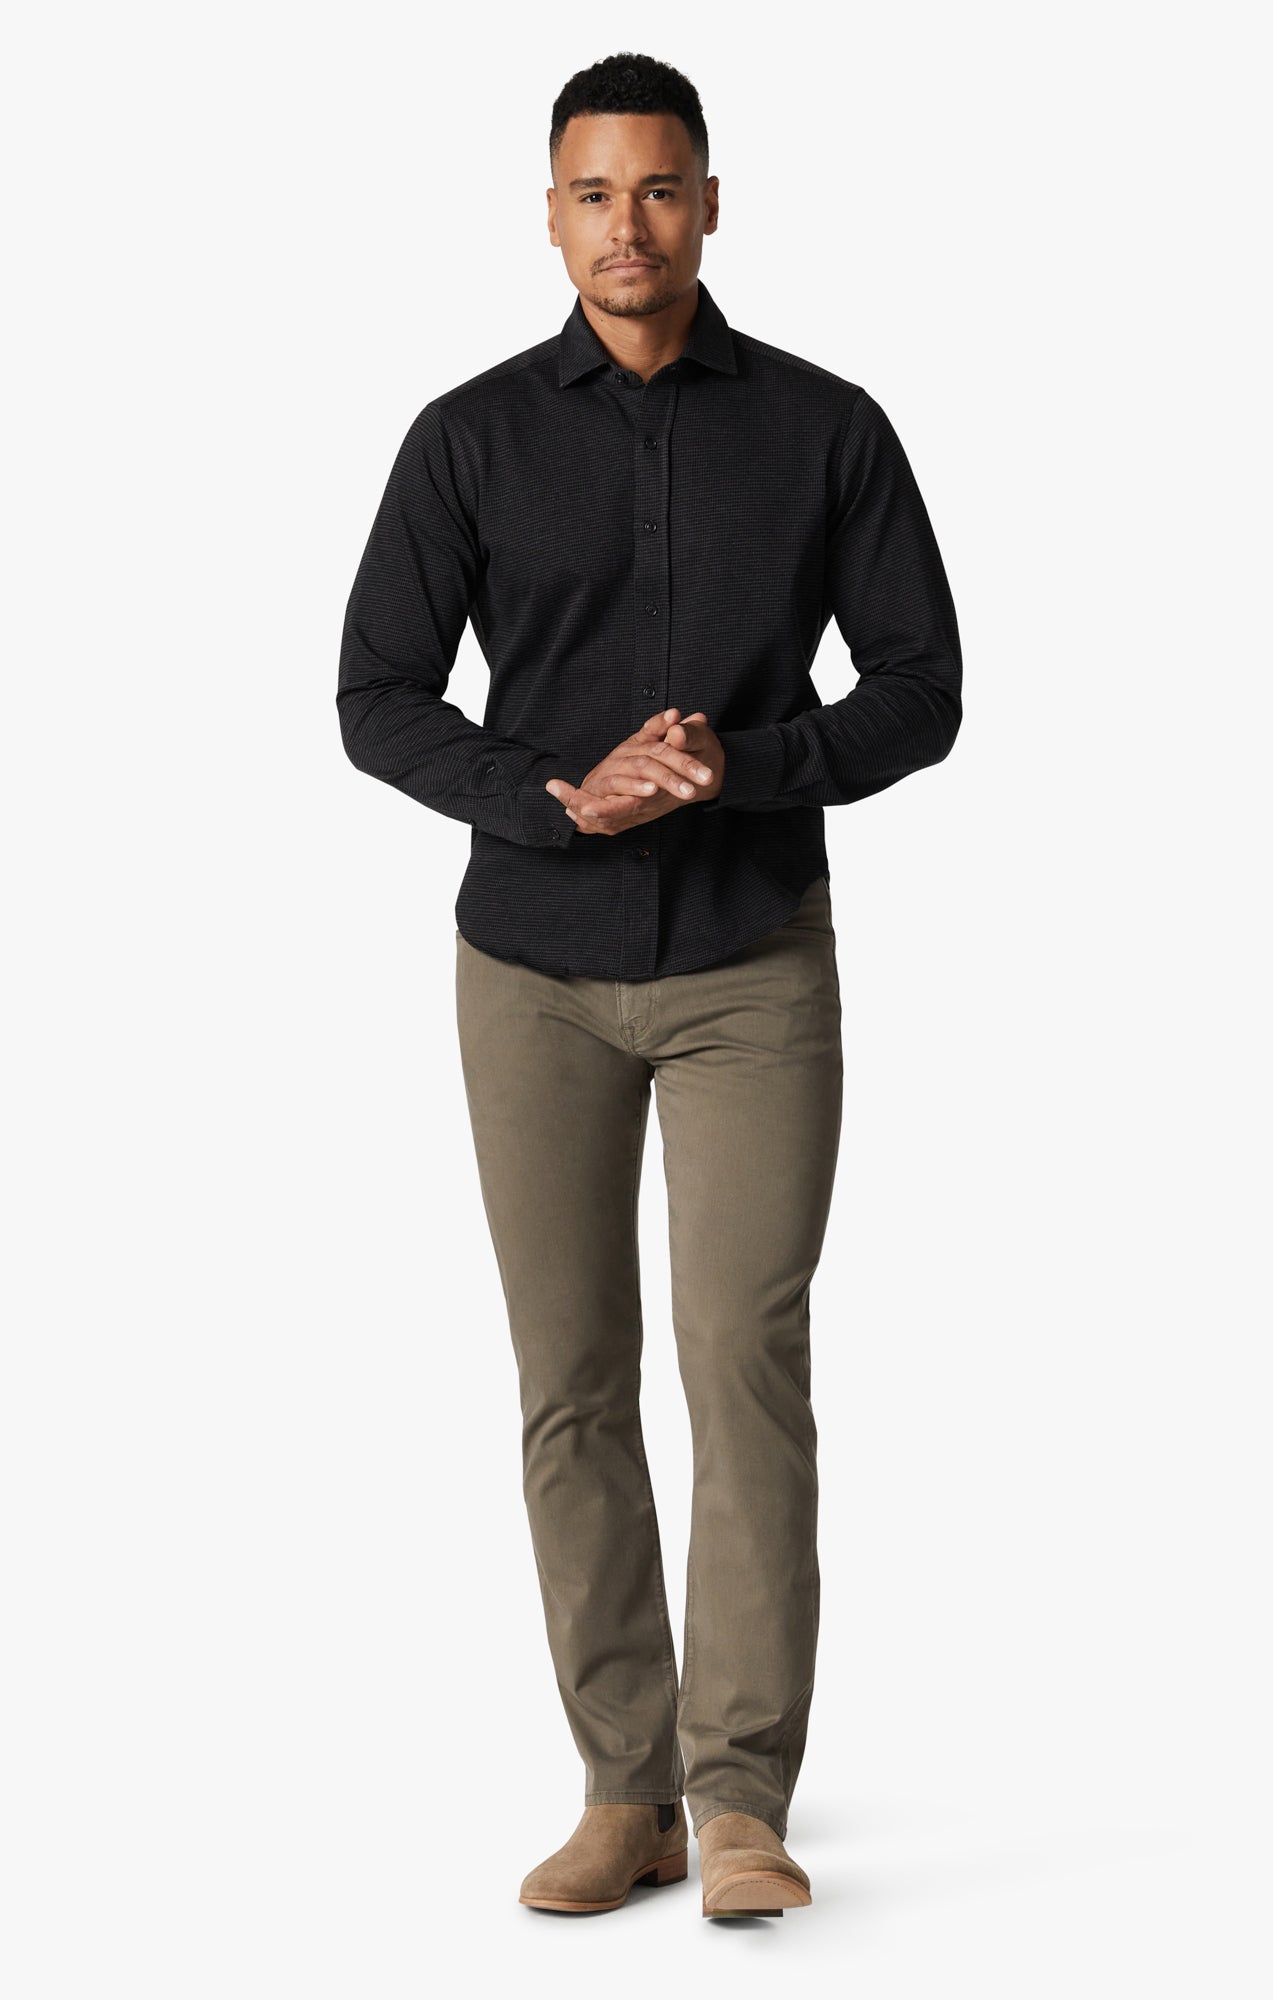 Courage Straight Leg Pants in Canteen Twill Image 1